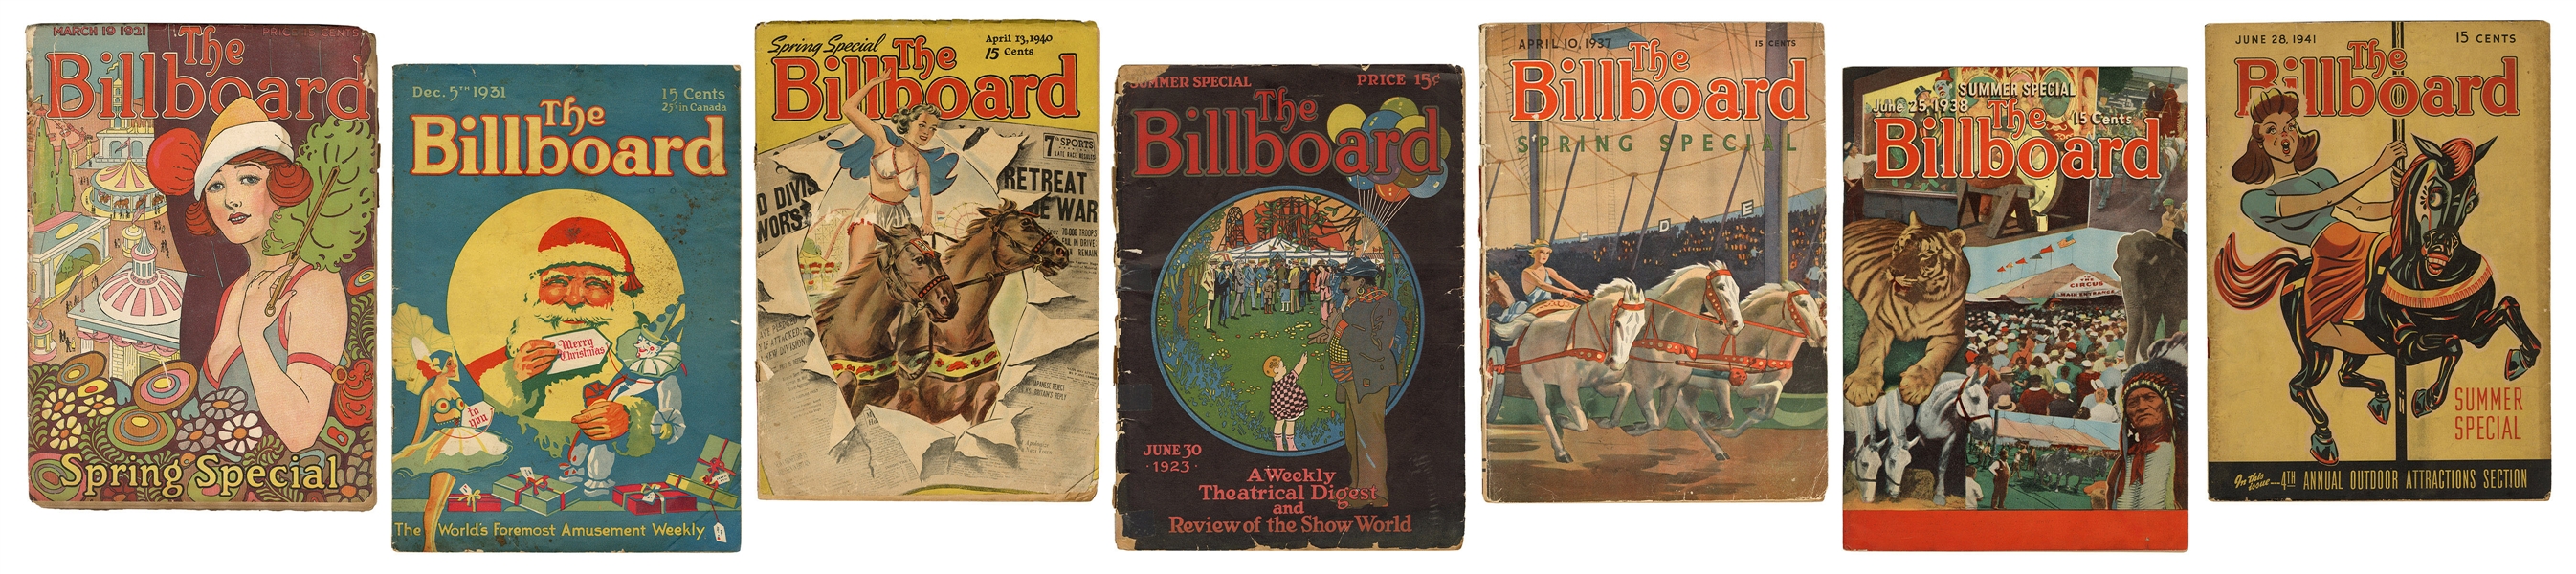  Enormous File of Billboard Magazines. 1920s/60s. A single o...